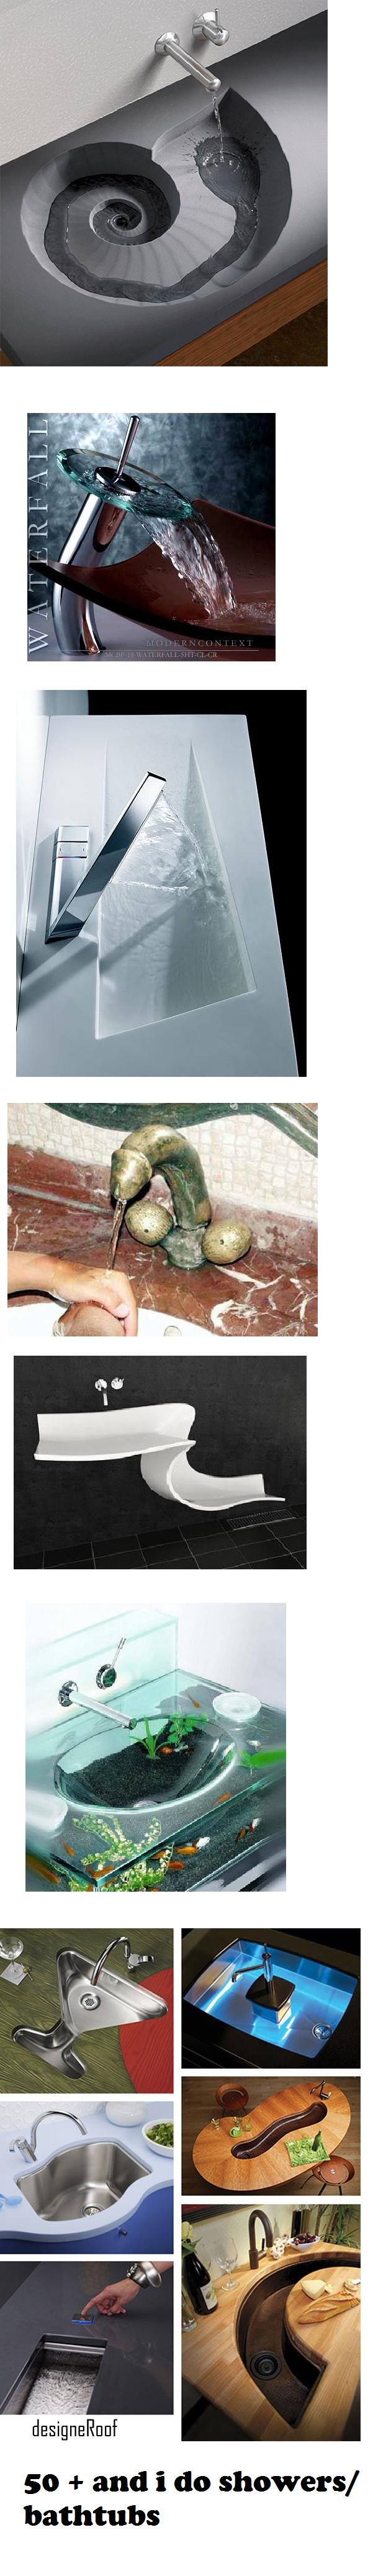 Awesome Sinks